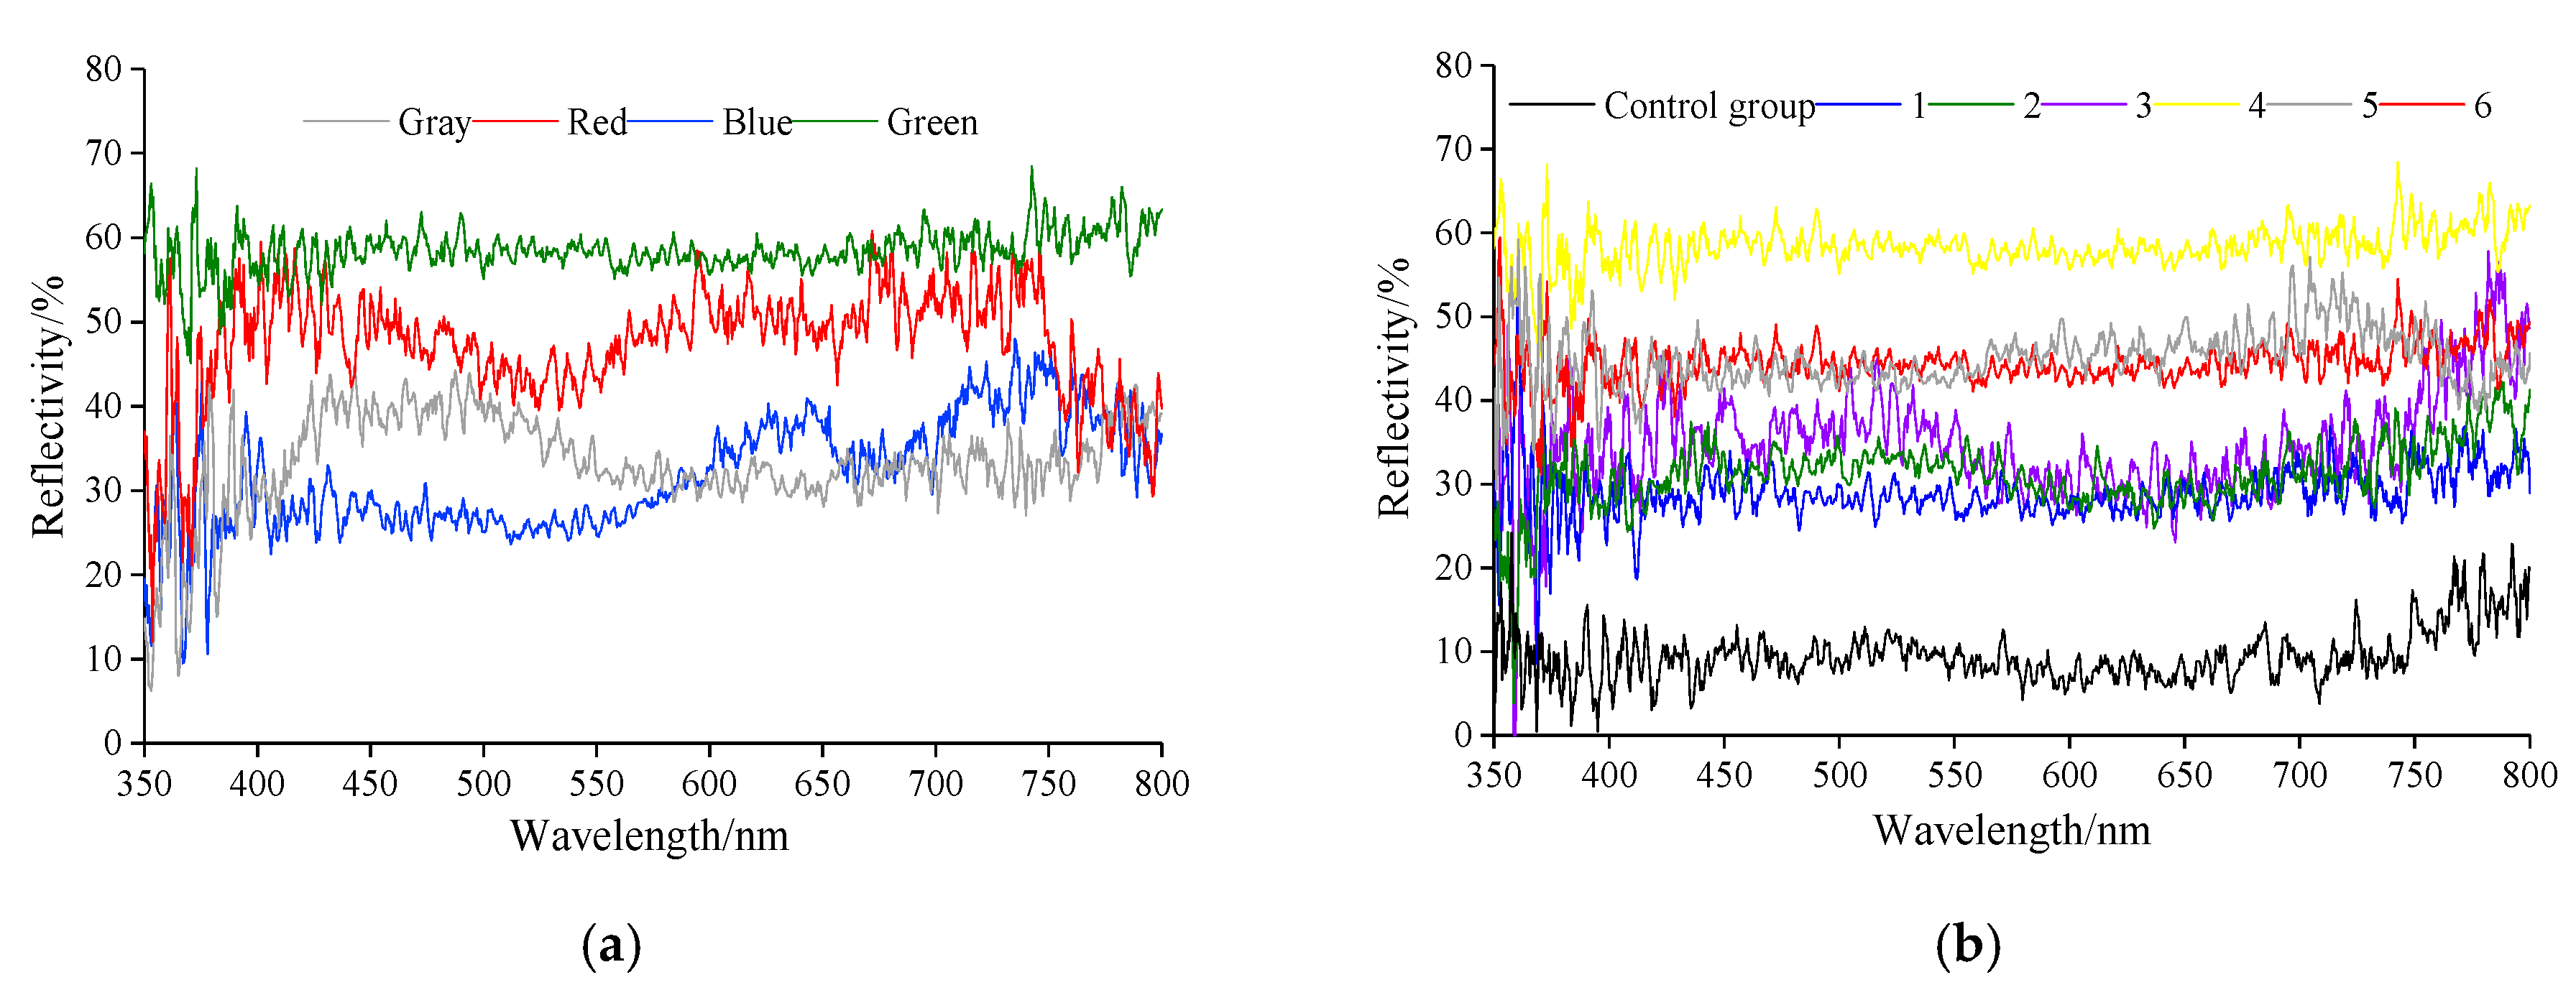 Cooling results of permeable surfaces with different reflectivities.